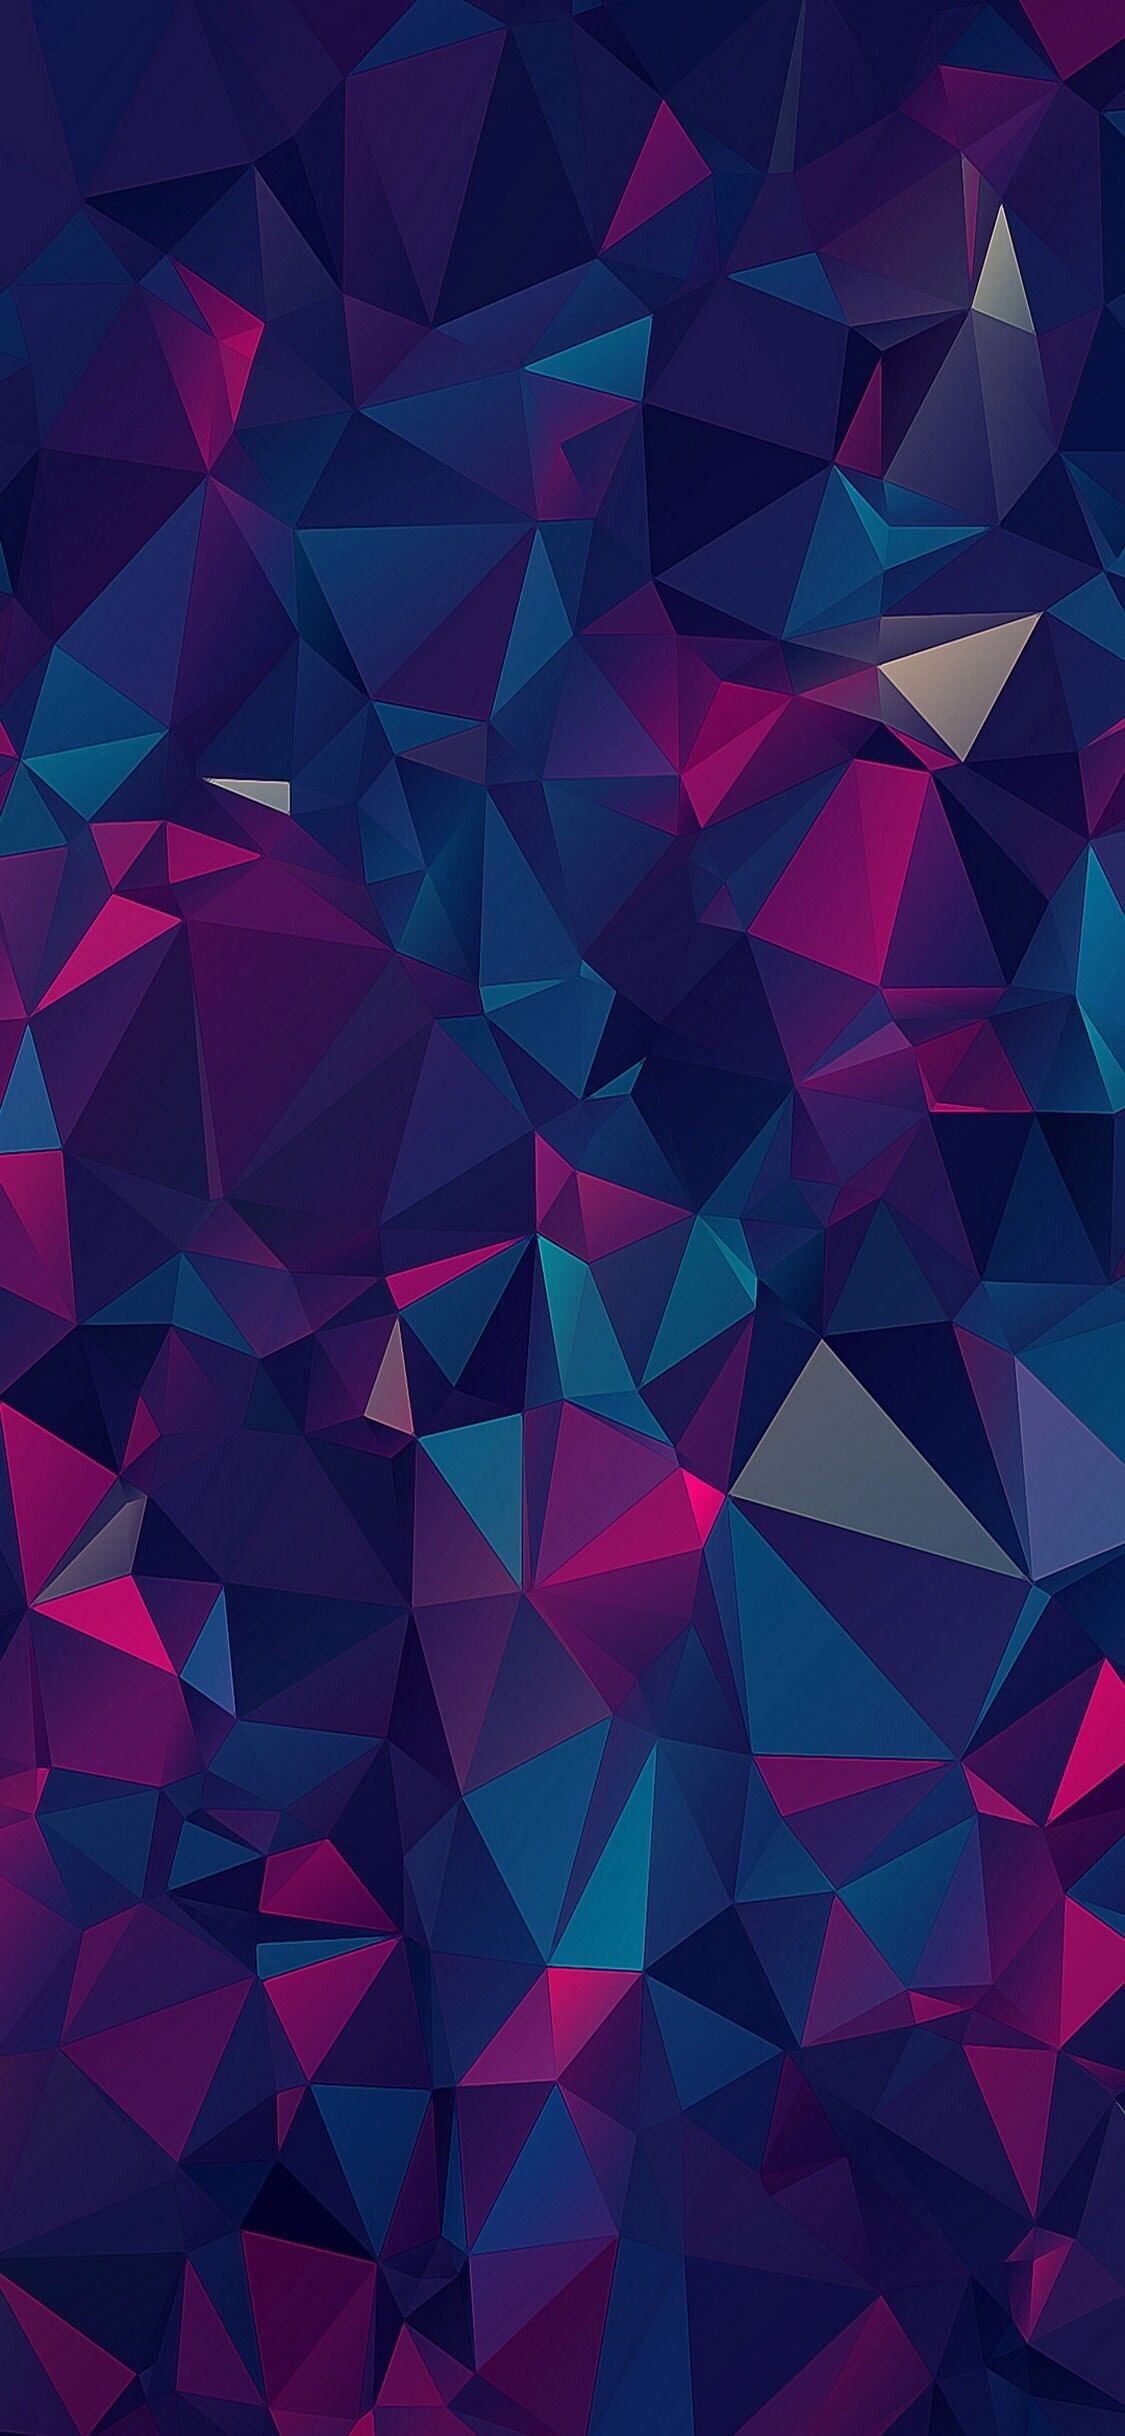 Geometric Abstract: Hexagons, Obtuse angles, Intersecting lines. 1130x2440 HD Wallpaper.